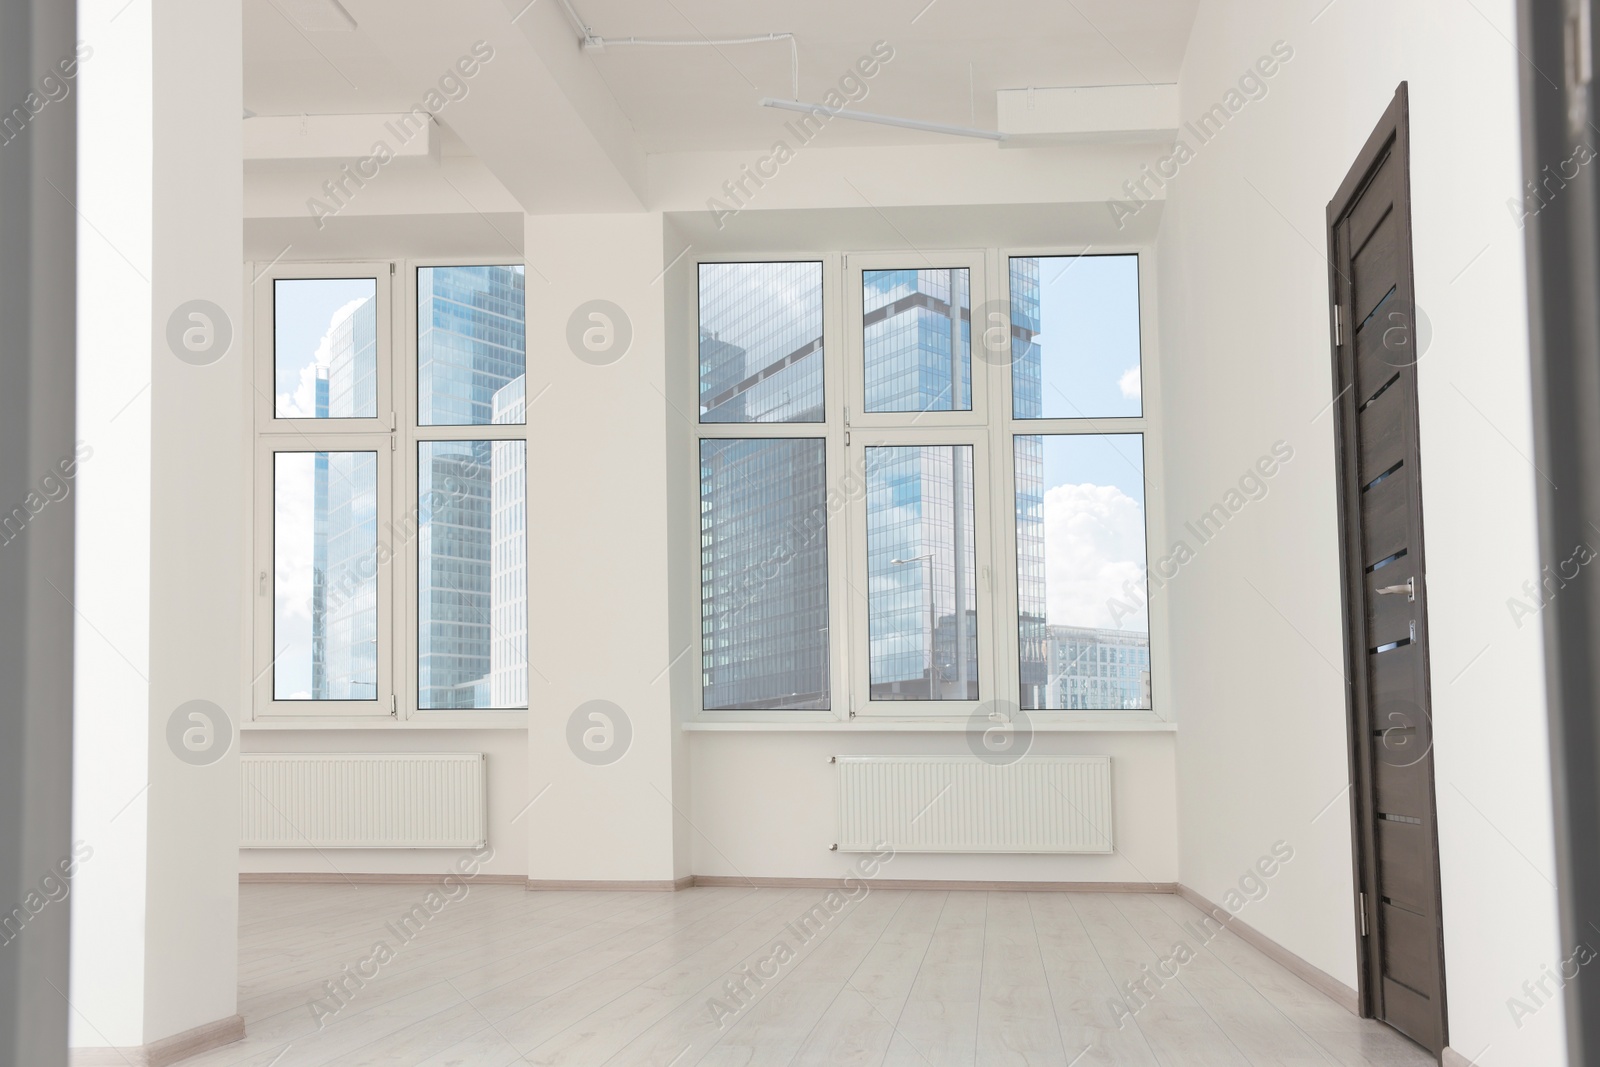 Photo of Modern office room with windows and door. Interior design